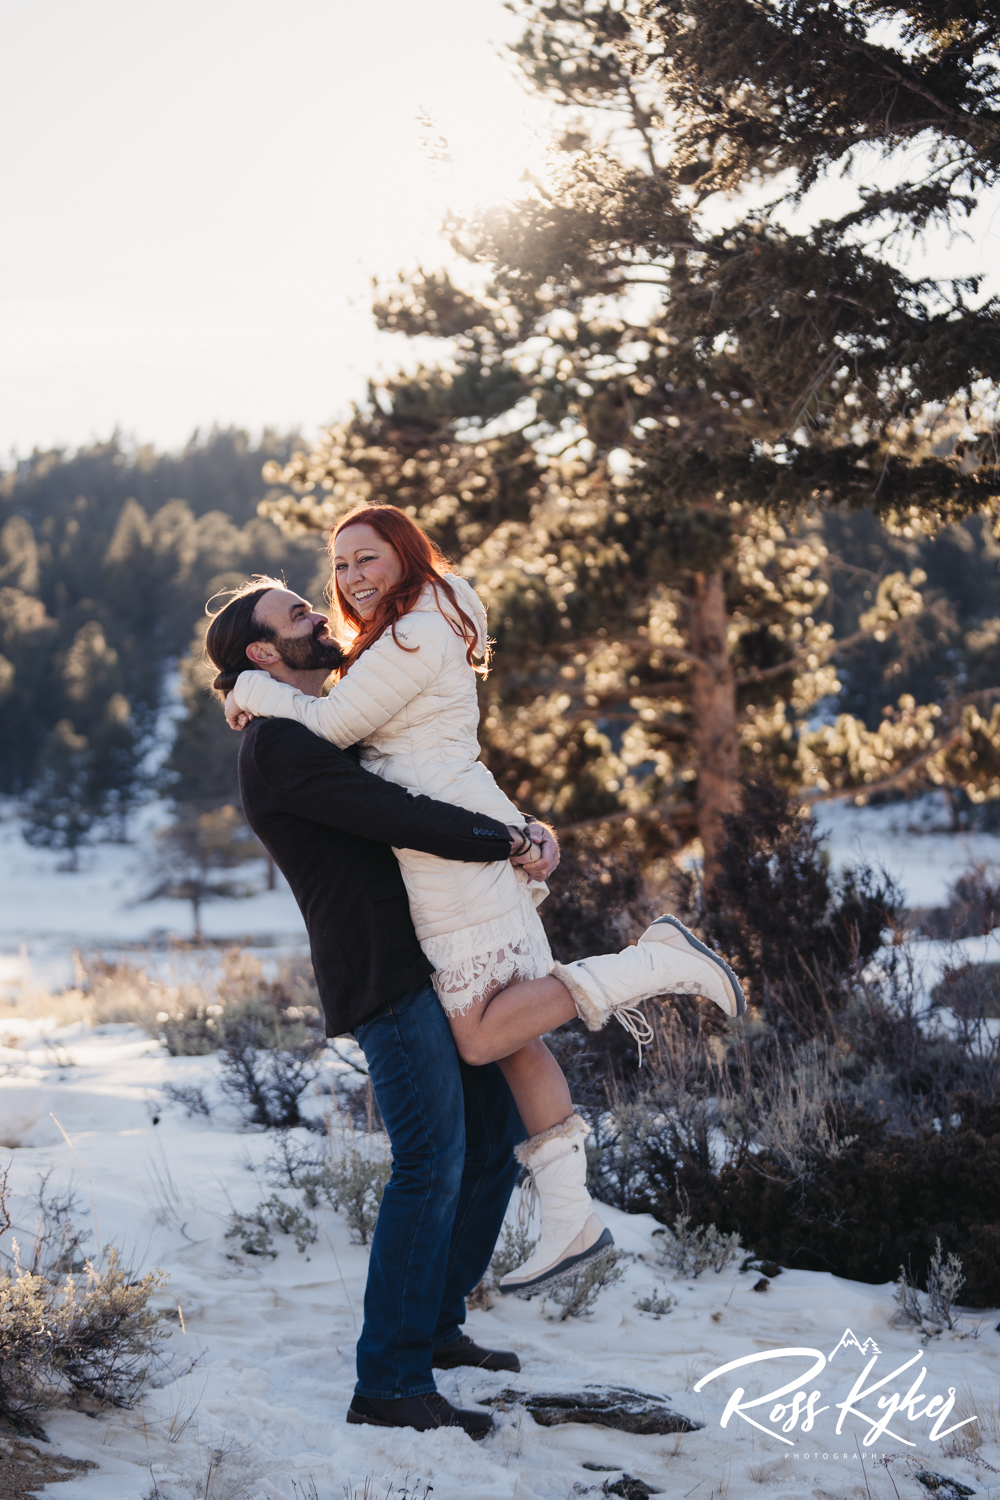 Embracing Intimacy: A Guide to Your Perfect Elopement